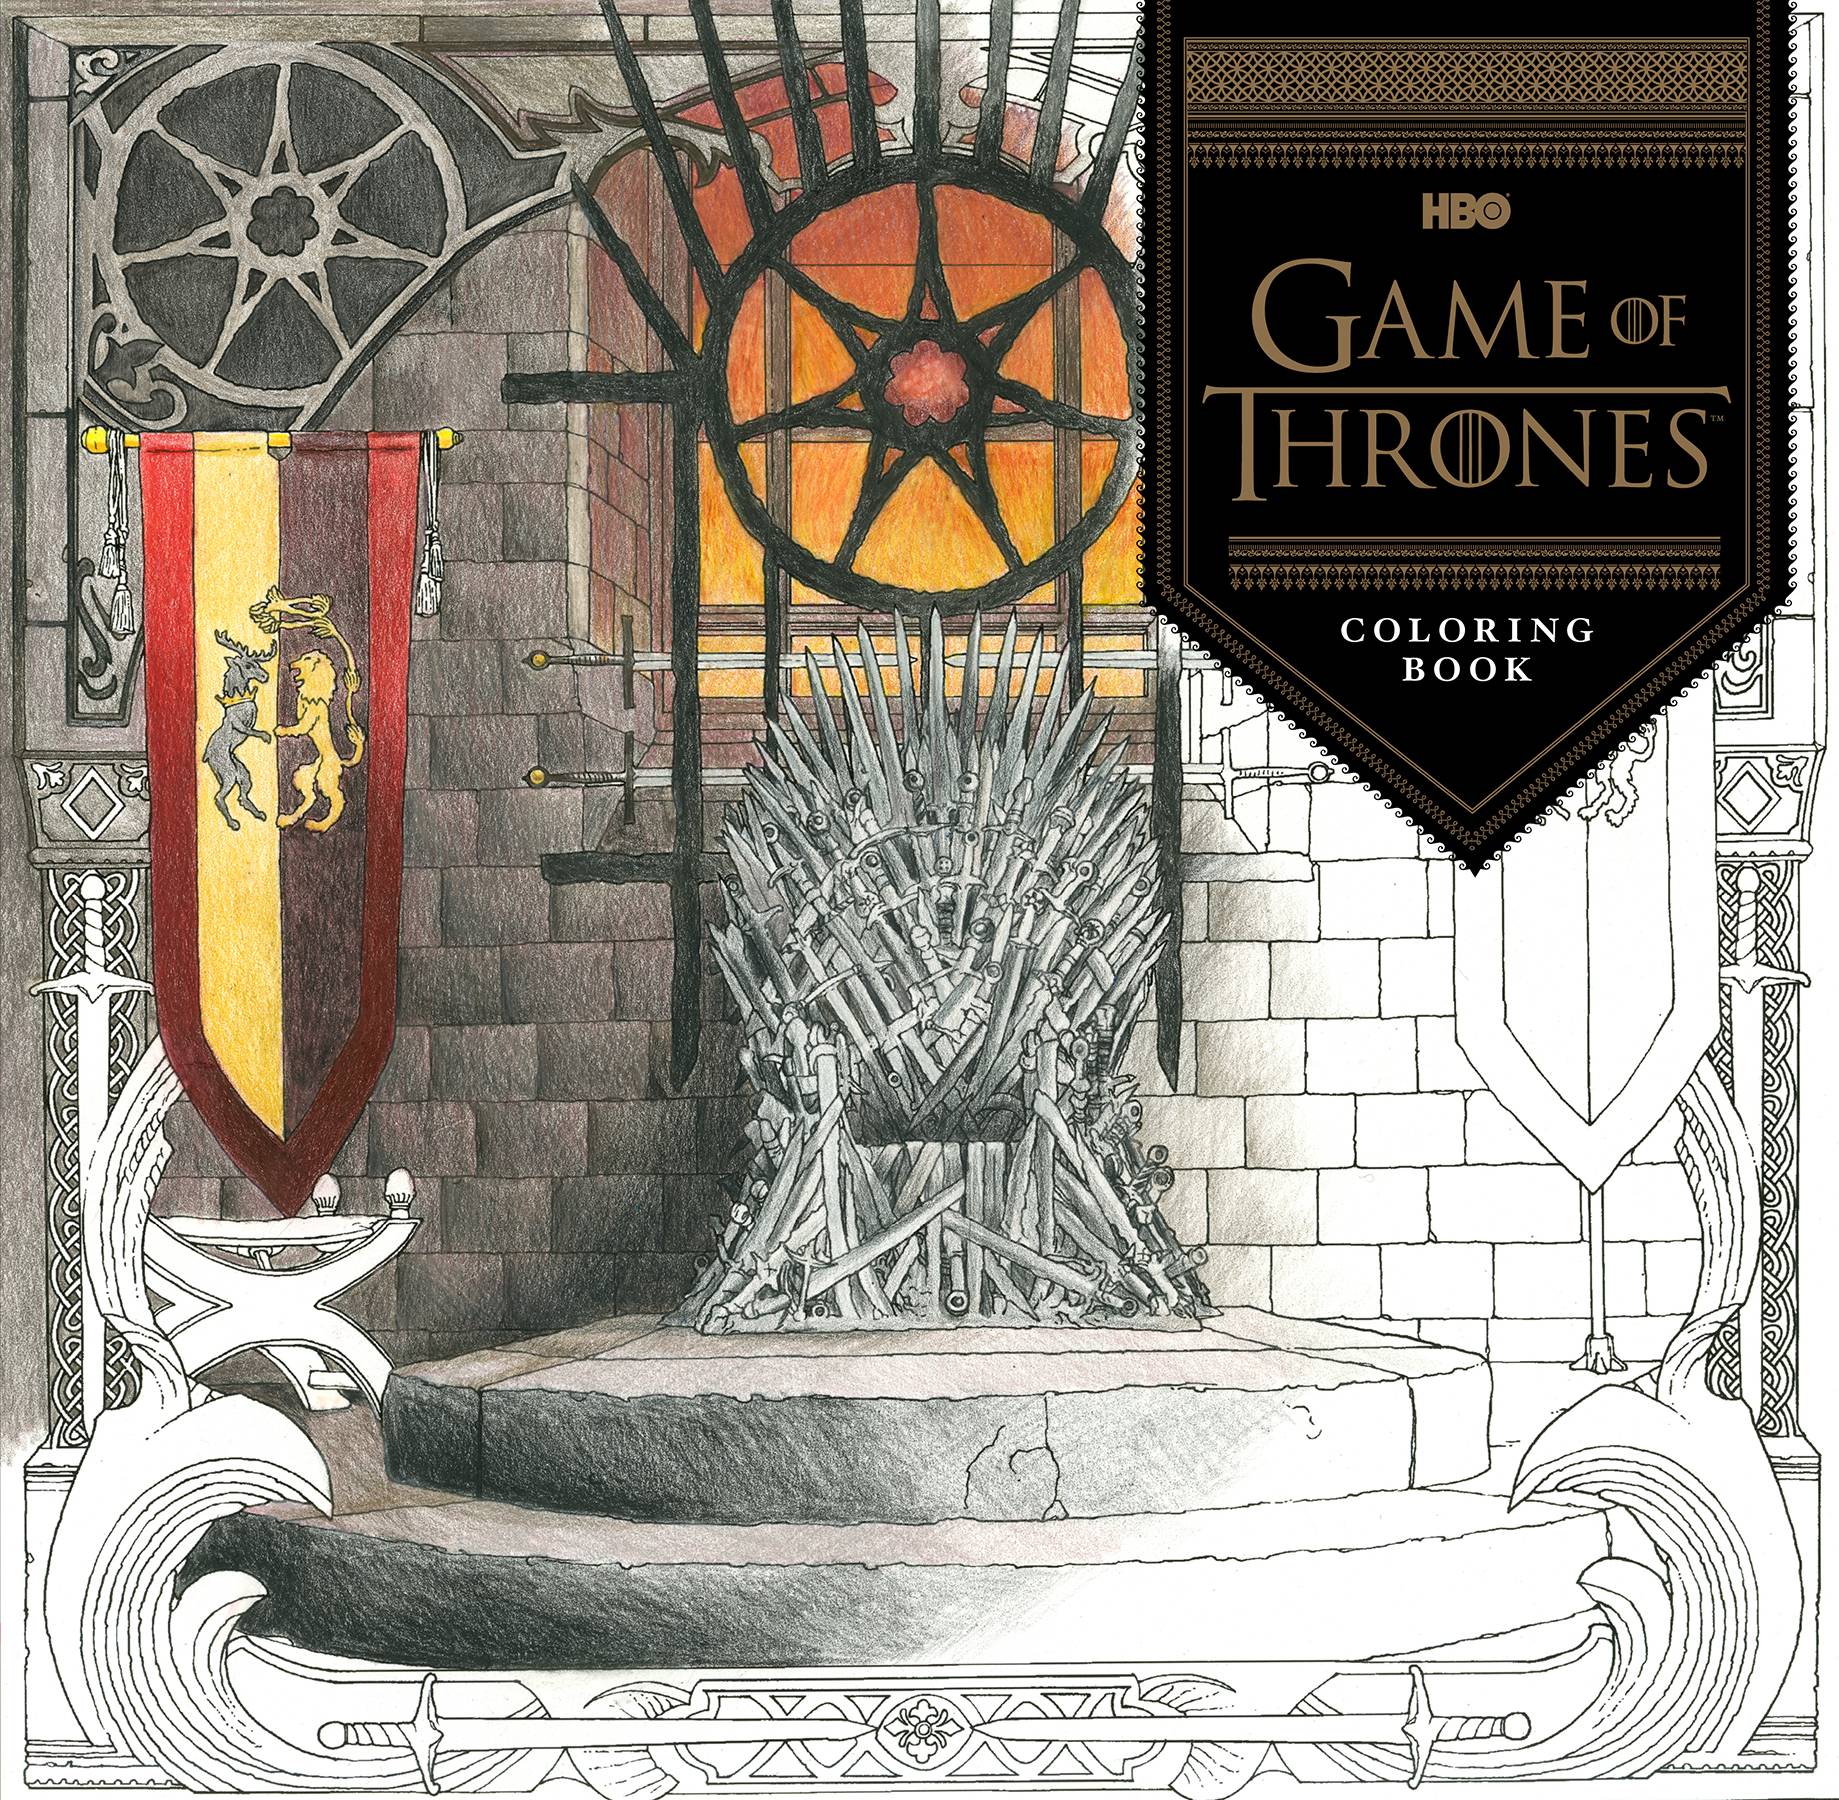 GAME OF THRONES HBO COLORING BOOK (RES)